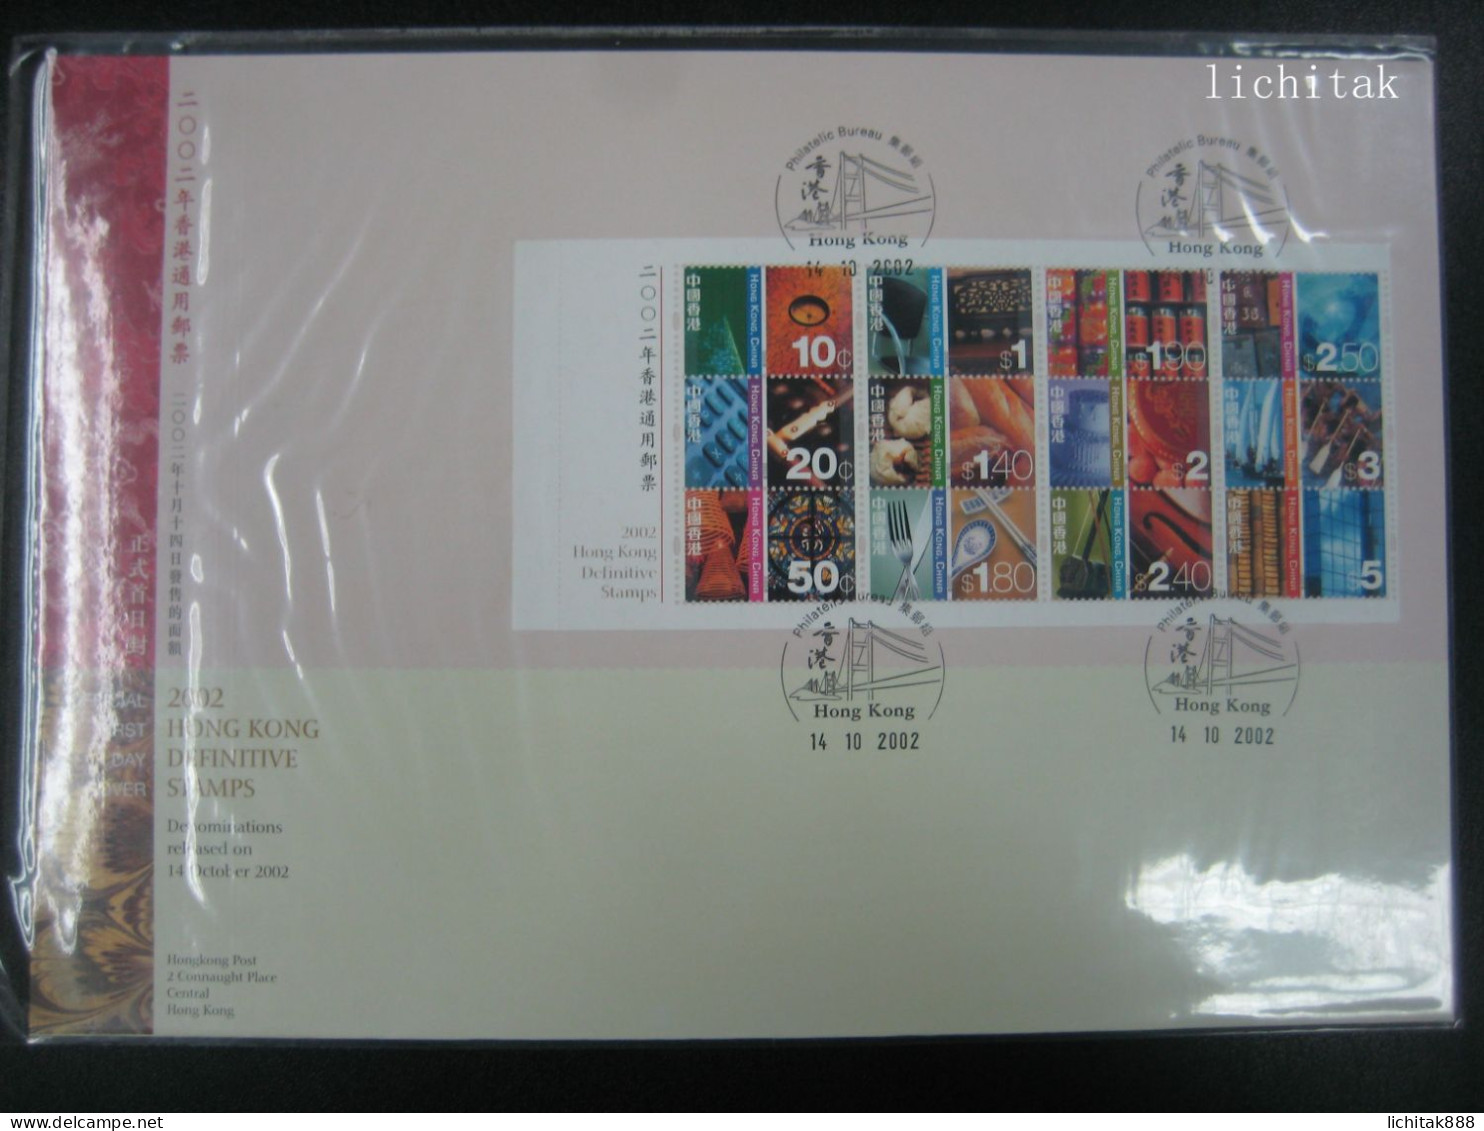 Hong Kong 2002 Eastern Western Culture Definitive Stamps Booklet First Day Cover - FDC